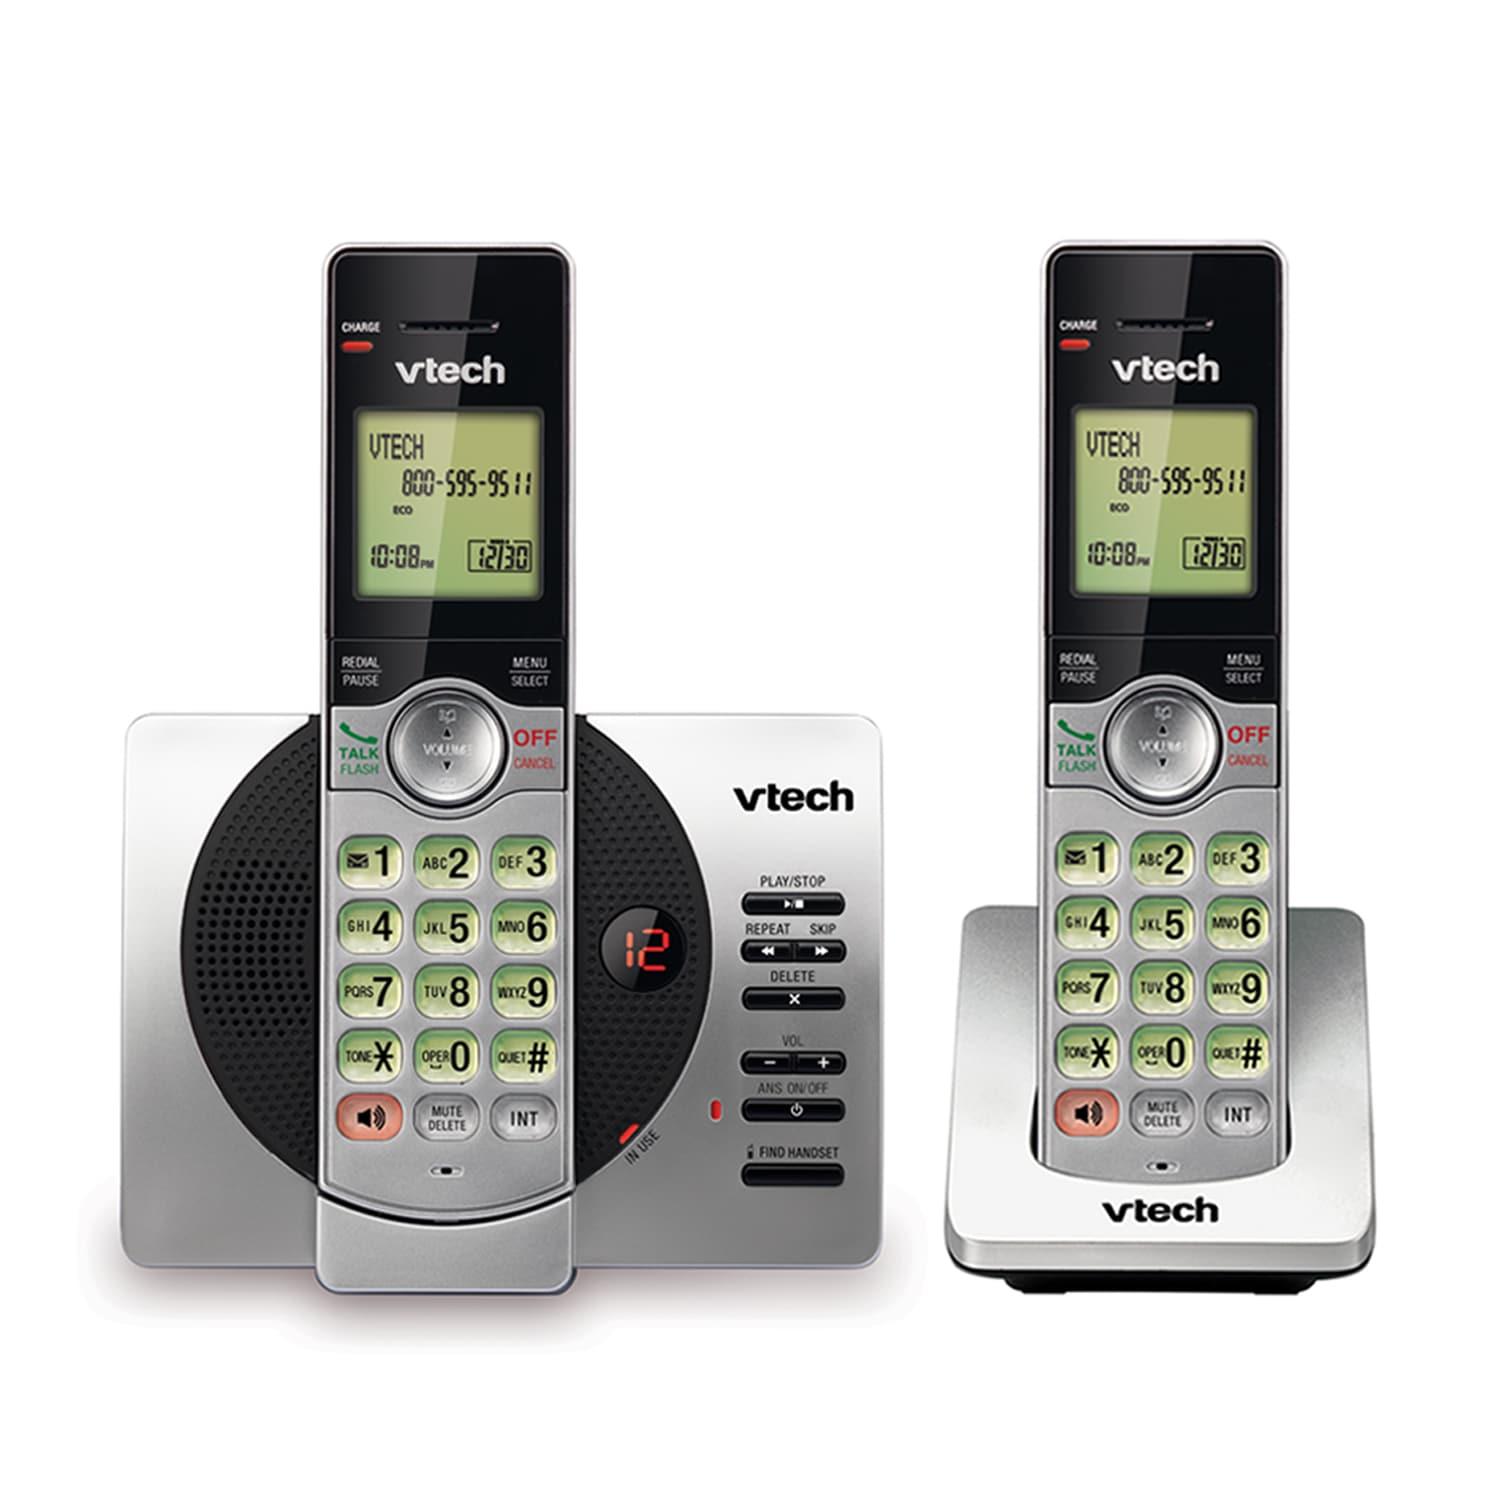 New VTECH DECT 6.0 CORDLESS HOME PHONE & ANSWERING MACHINE SET SYSTEM lot 